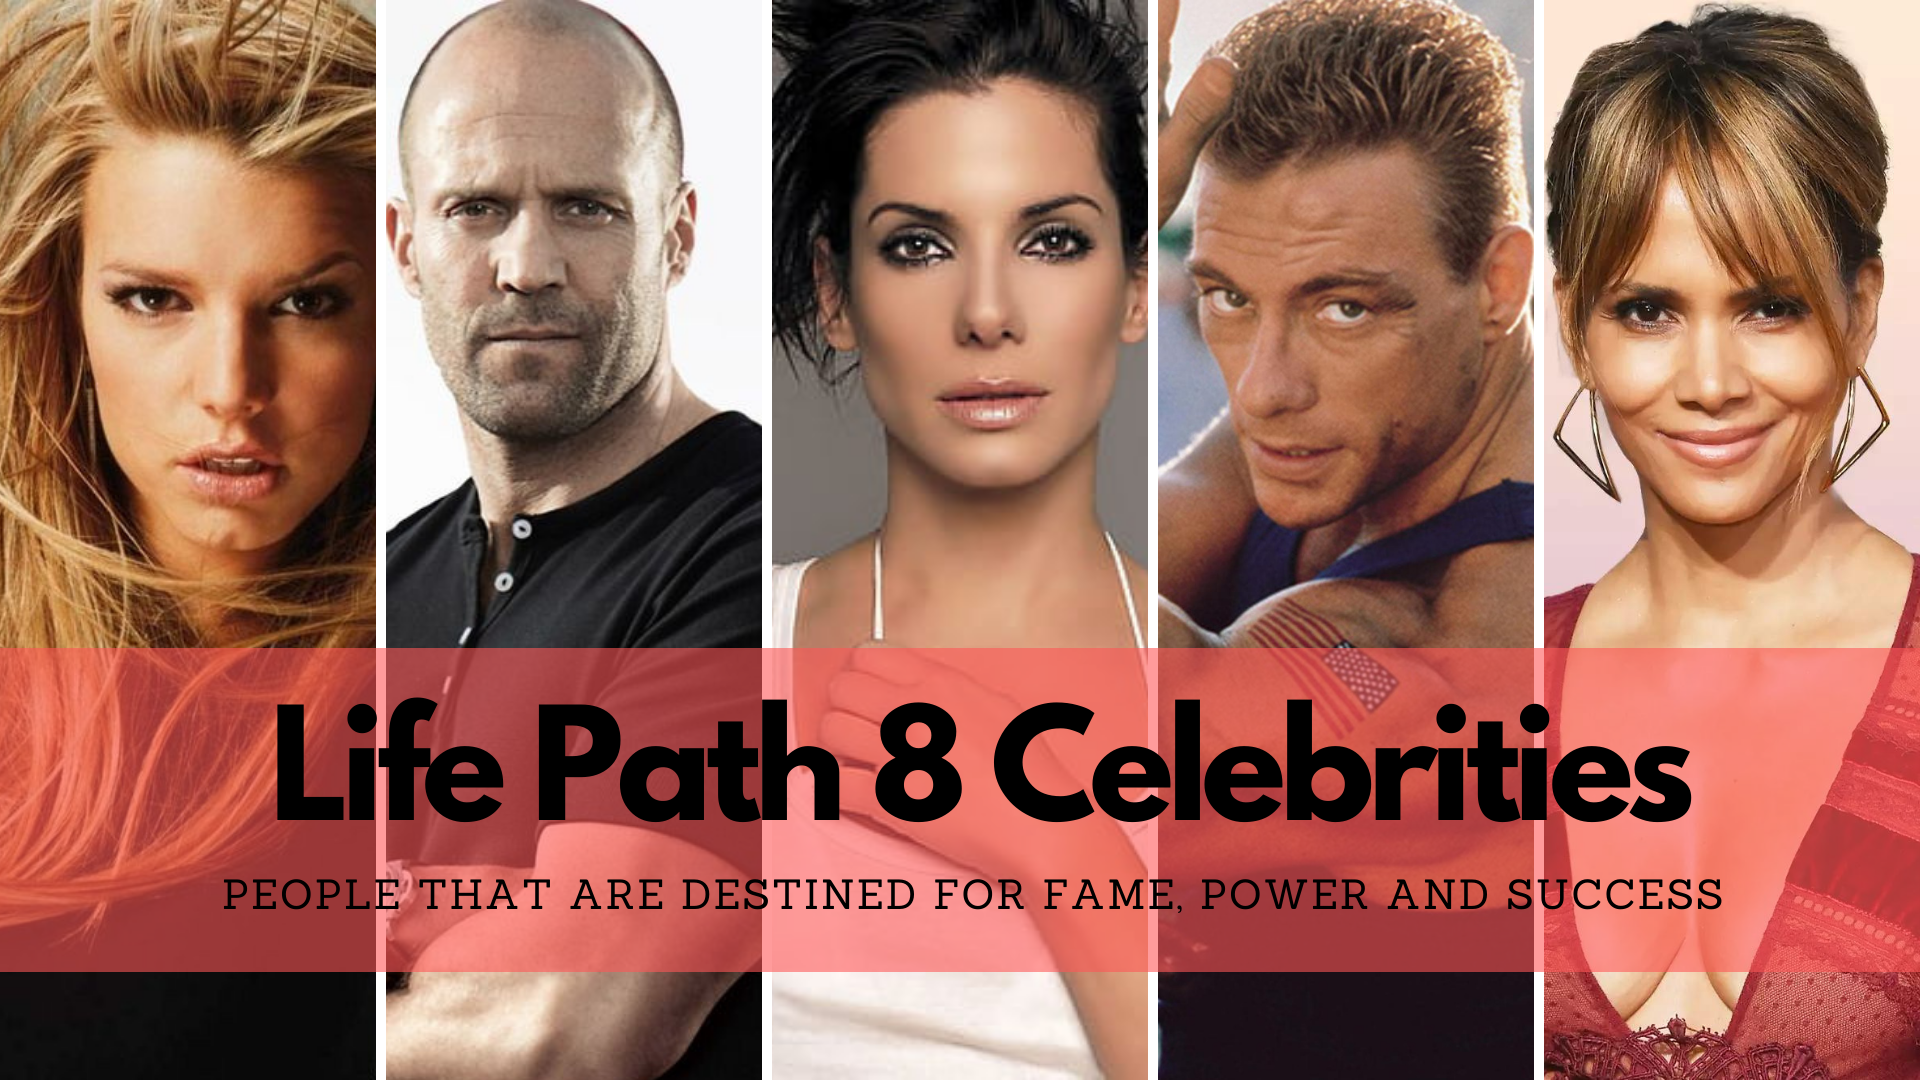 Life Path 8 Celebrities - People That Are Destined For Fame, Power, And Success